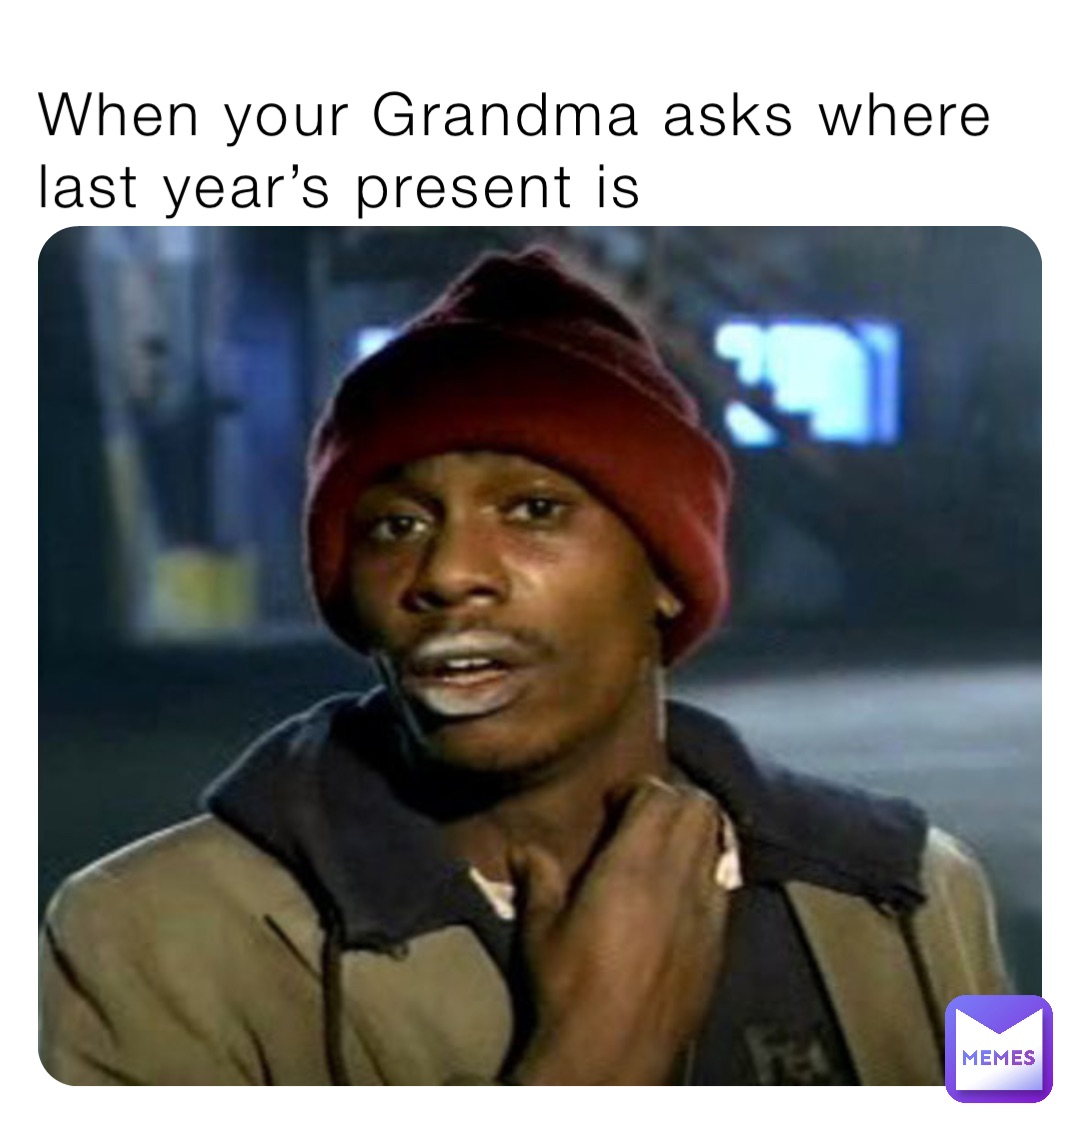 When your Grandma asks where last year’s present is